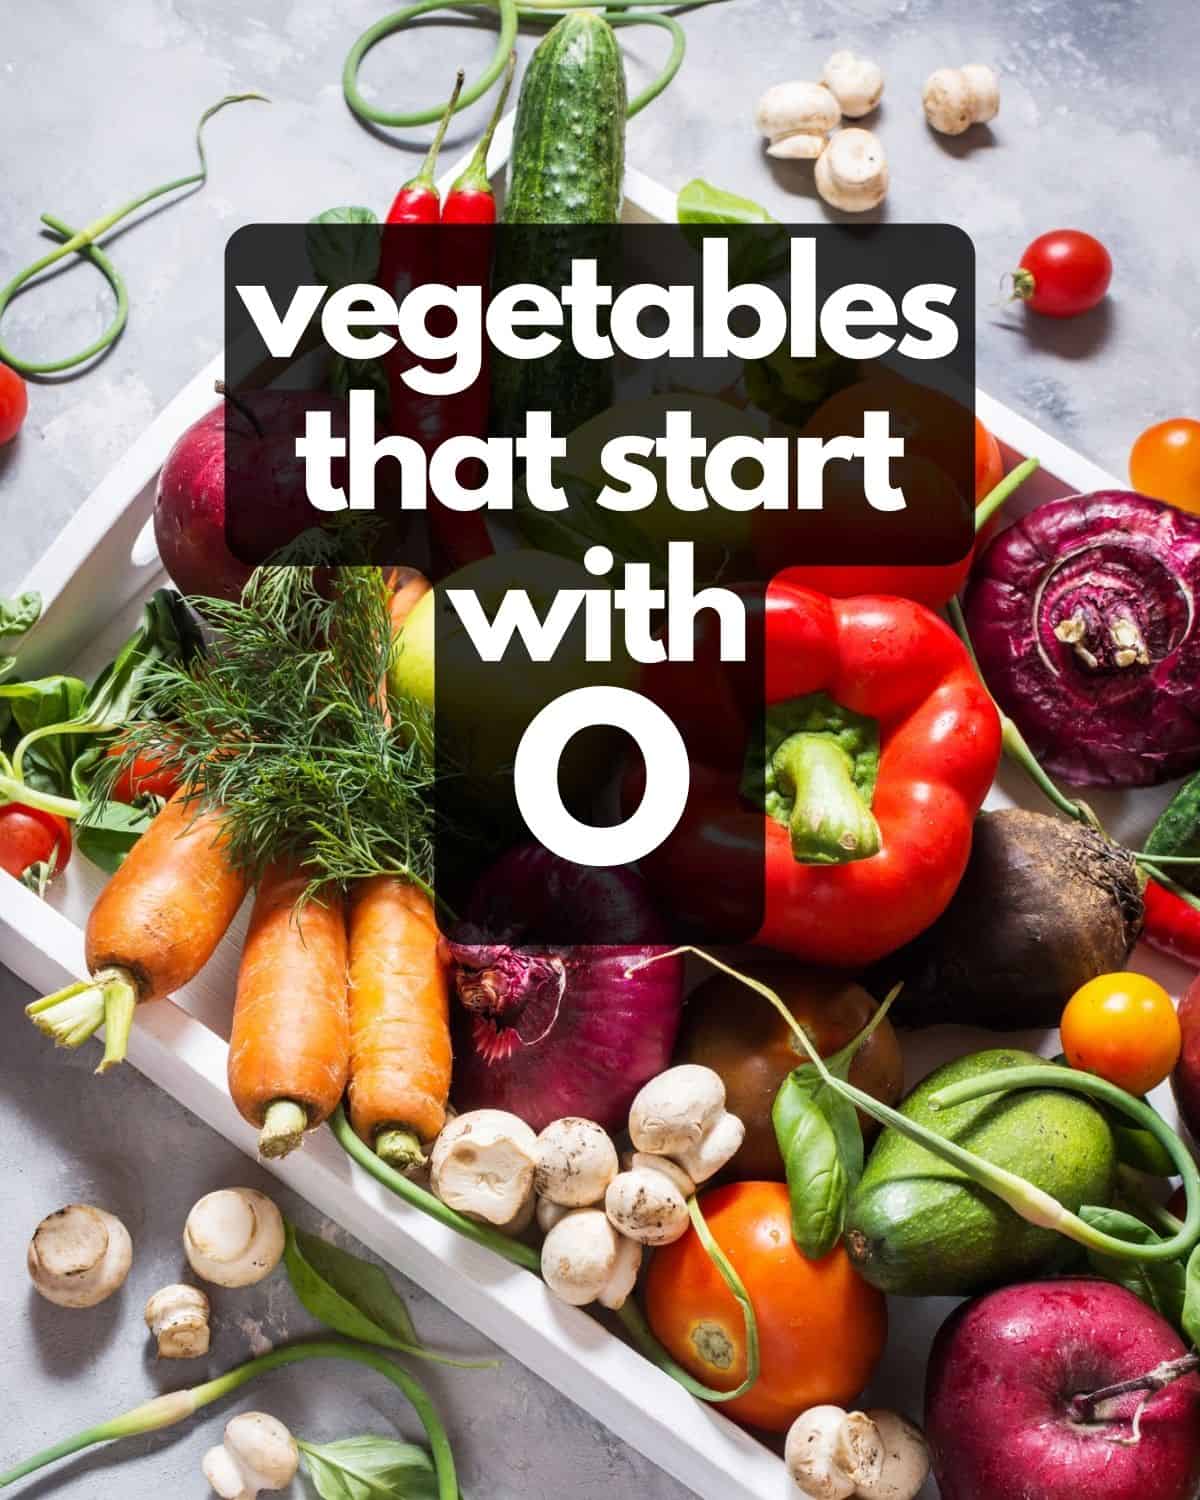 Table of vegetables, plus text: Vegetables that start with O.